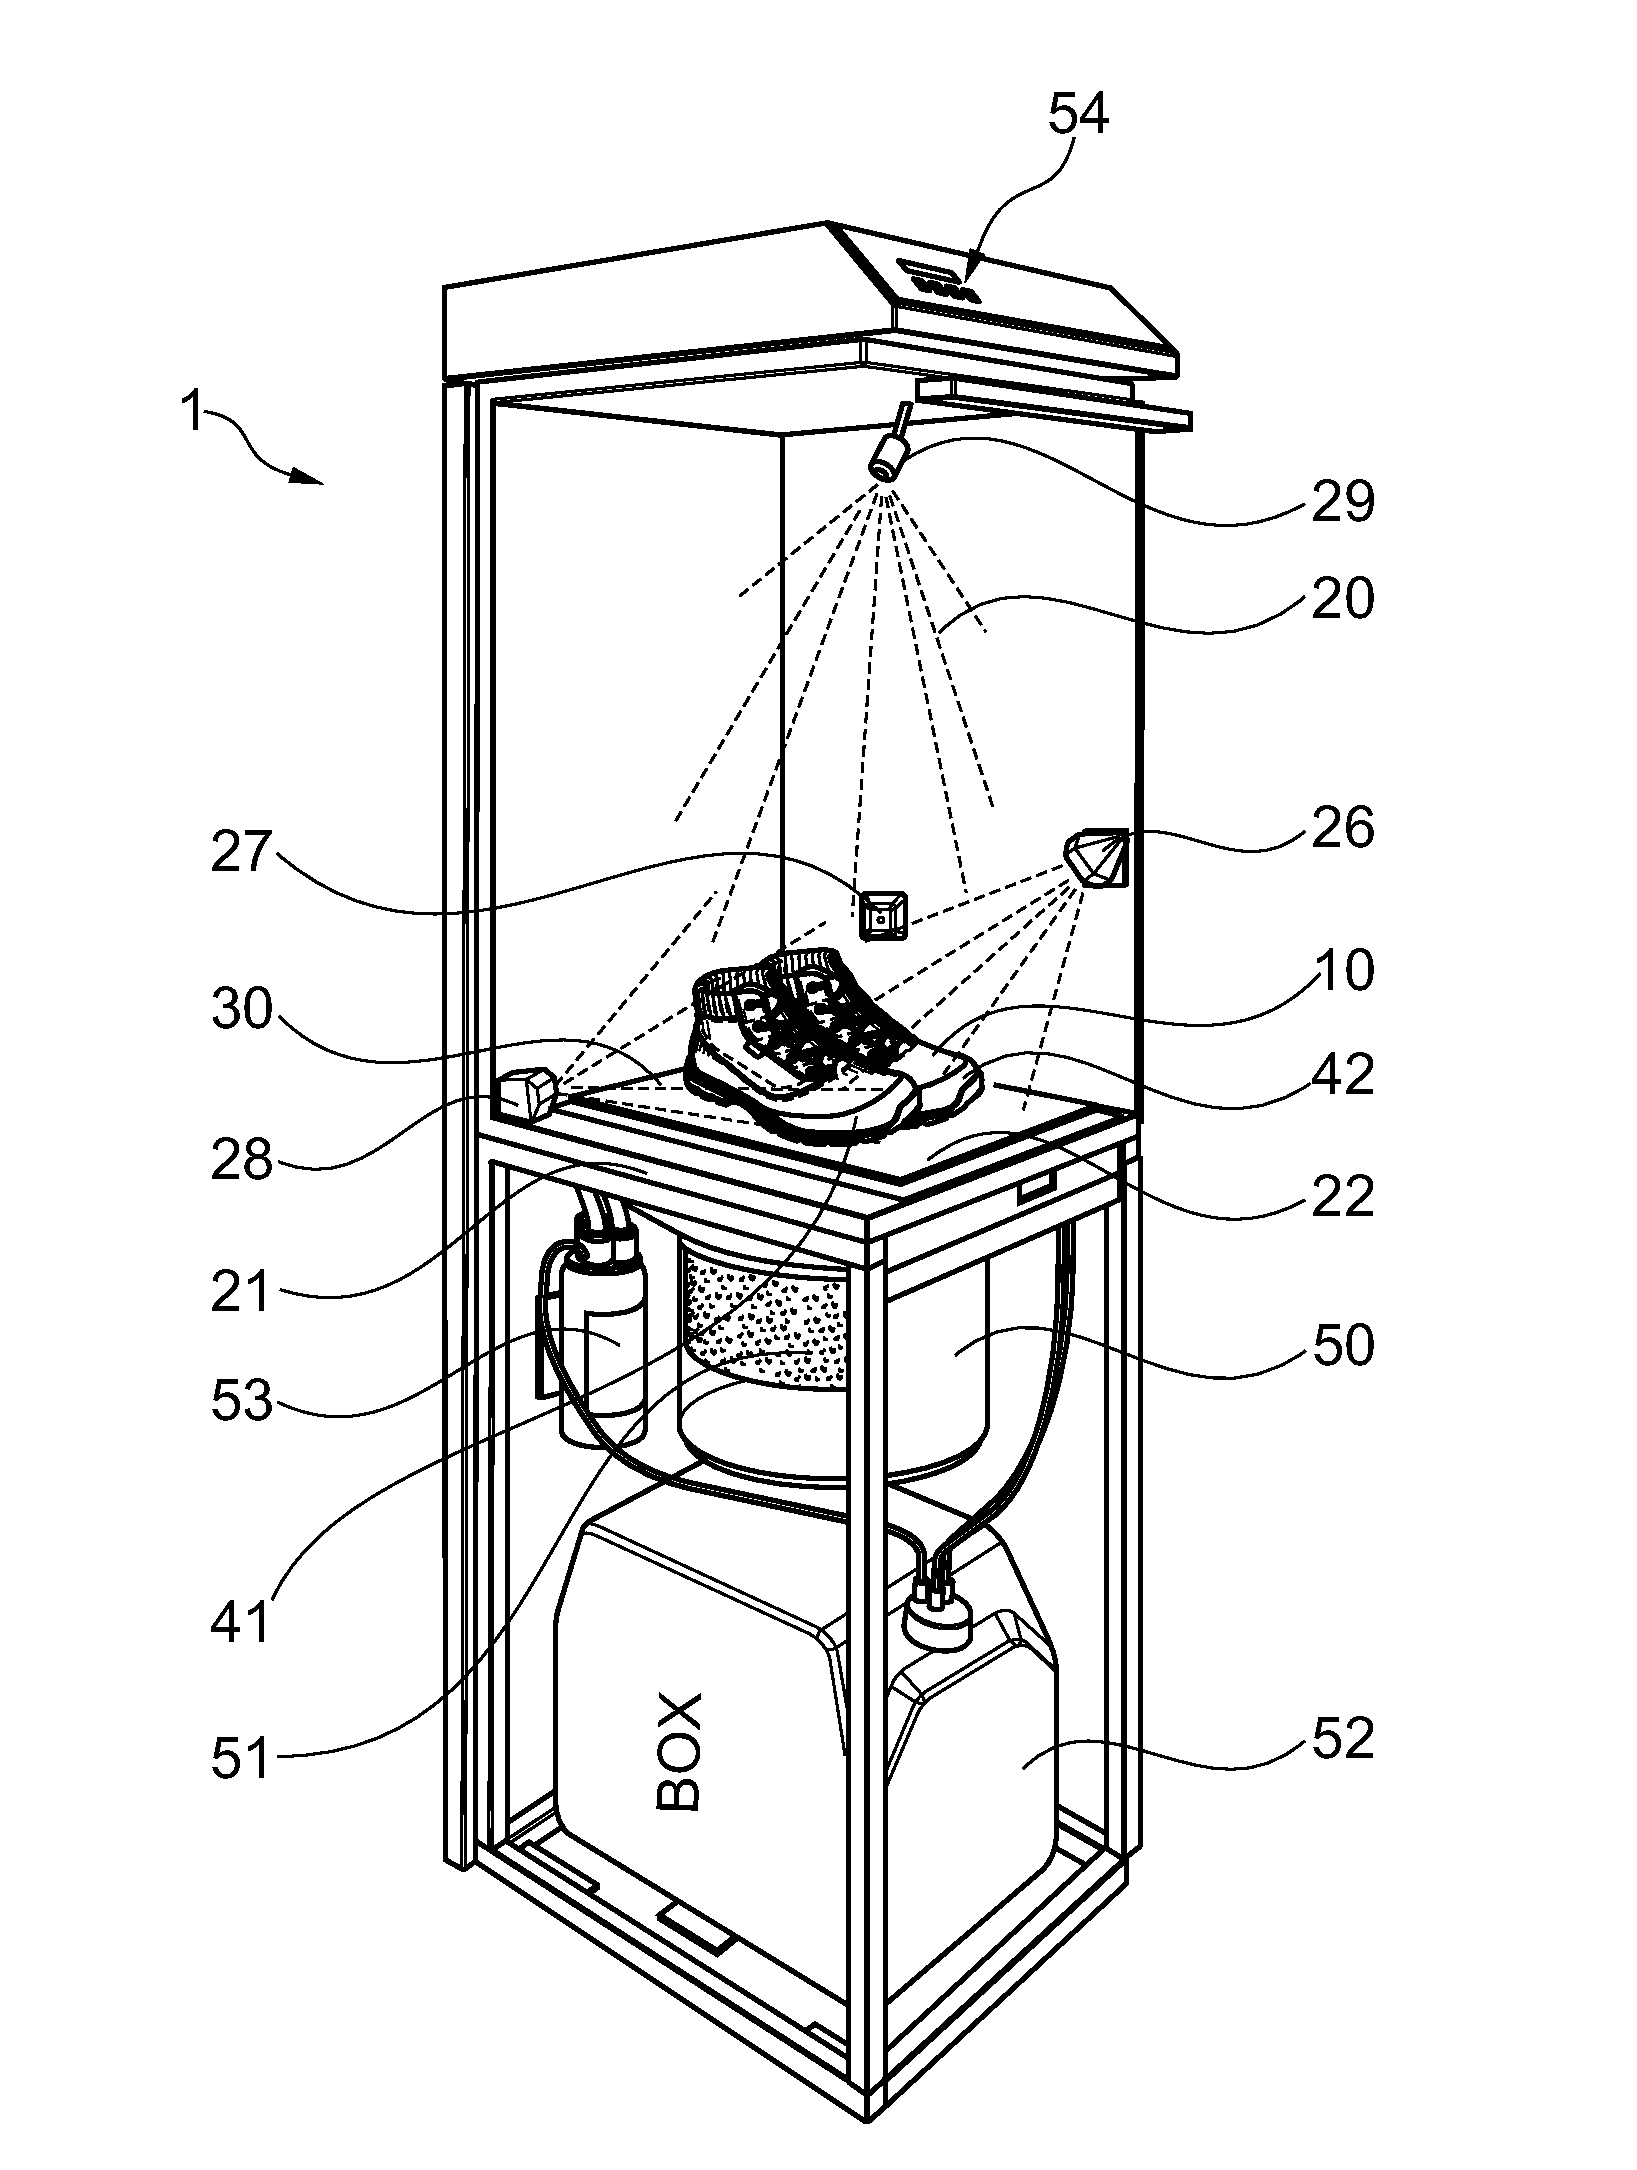 Apparatus and method for applying an impregnating agent onto surfaces of items, in particular footwear